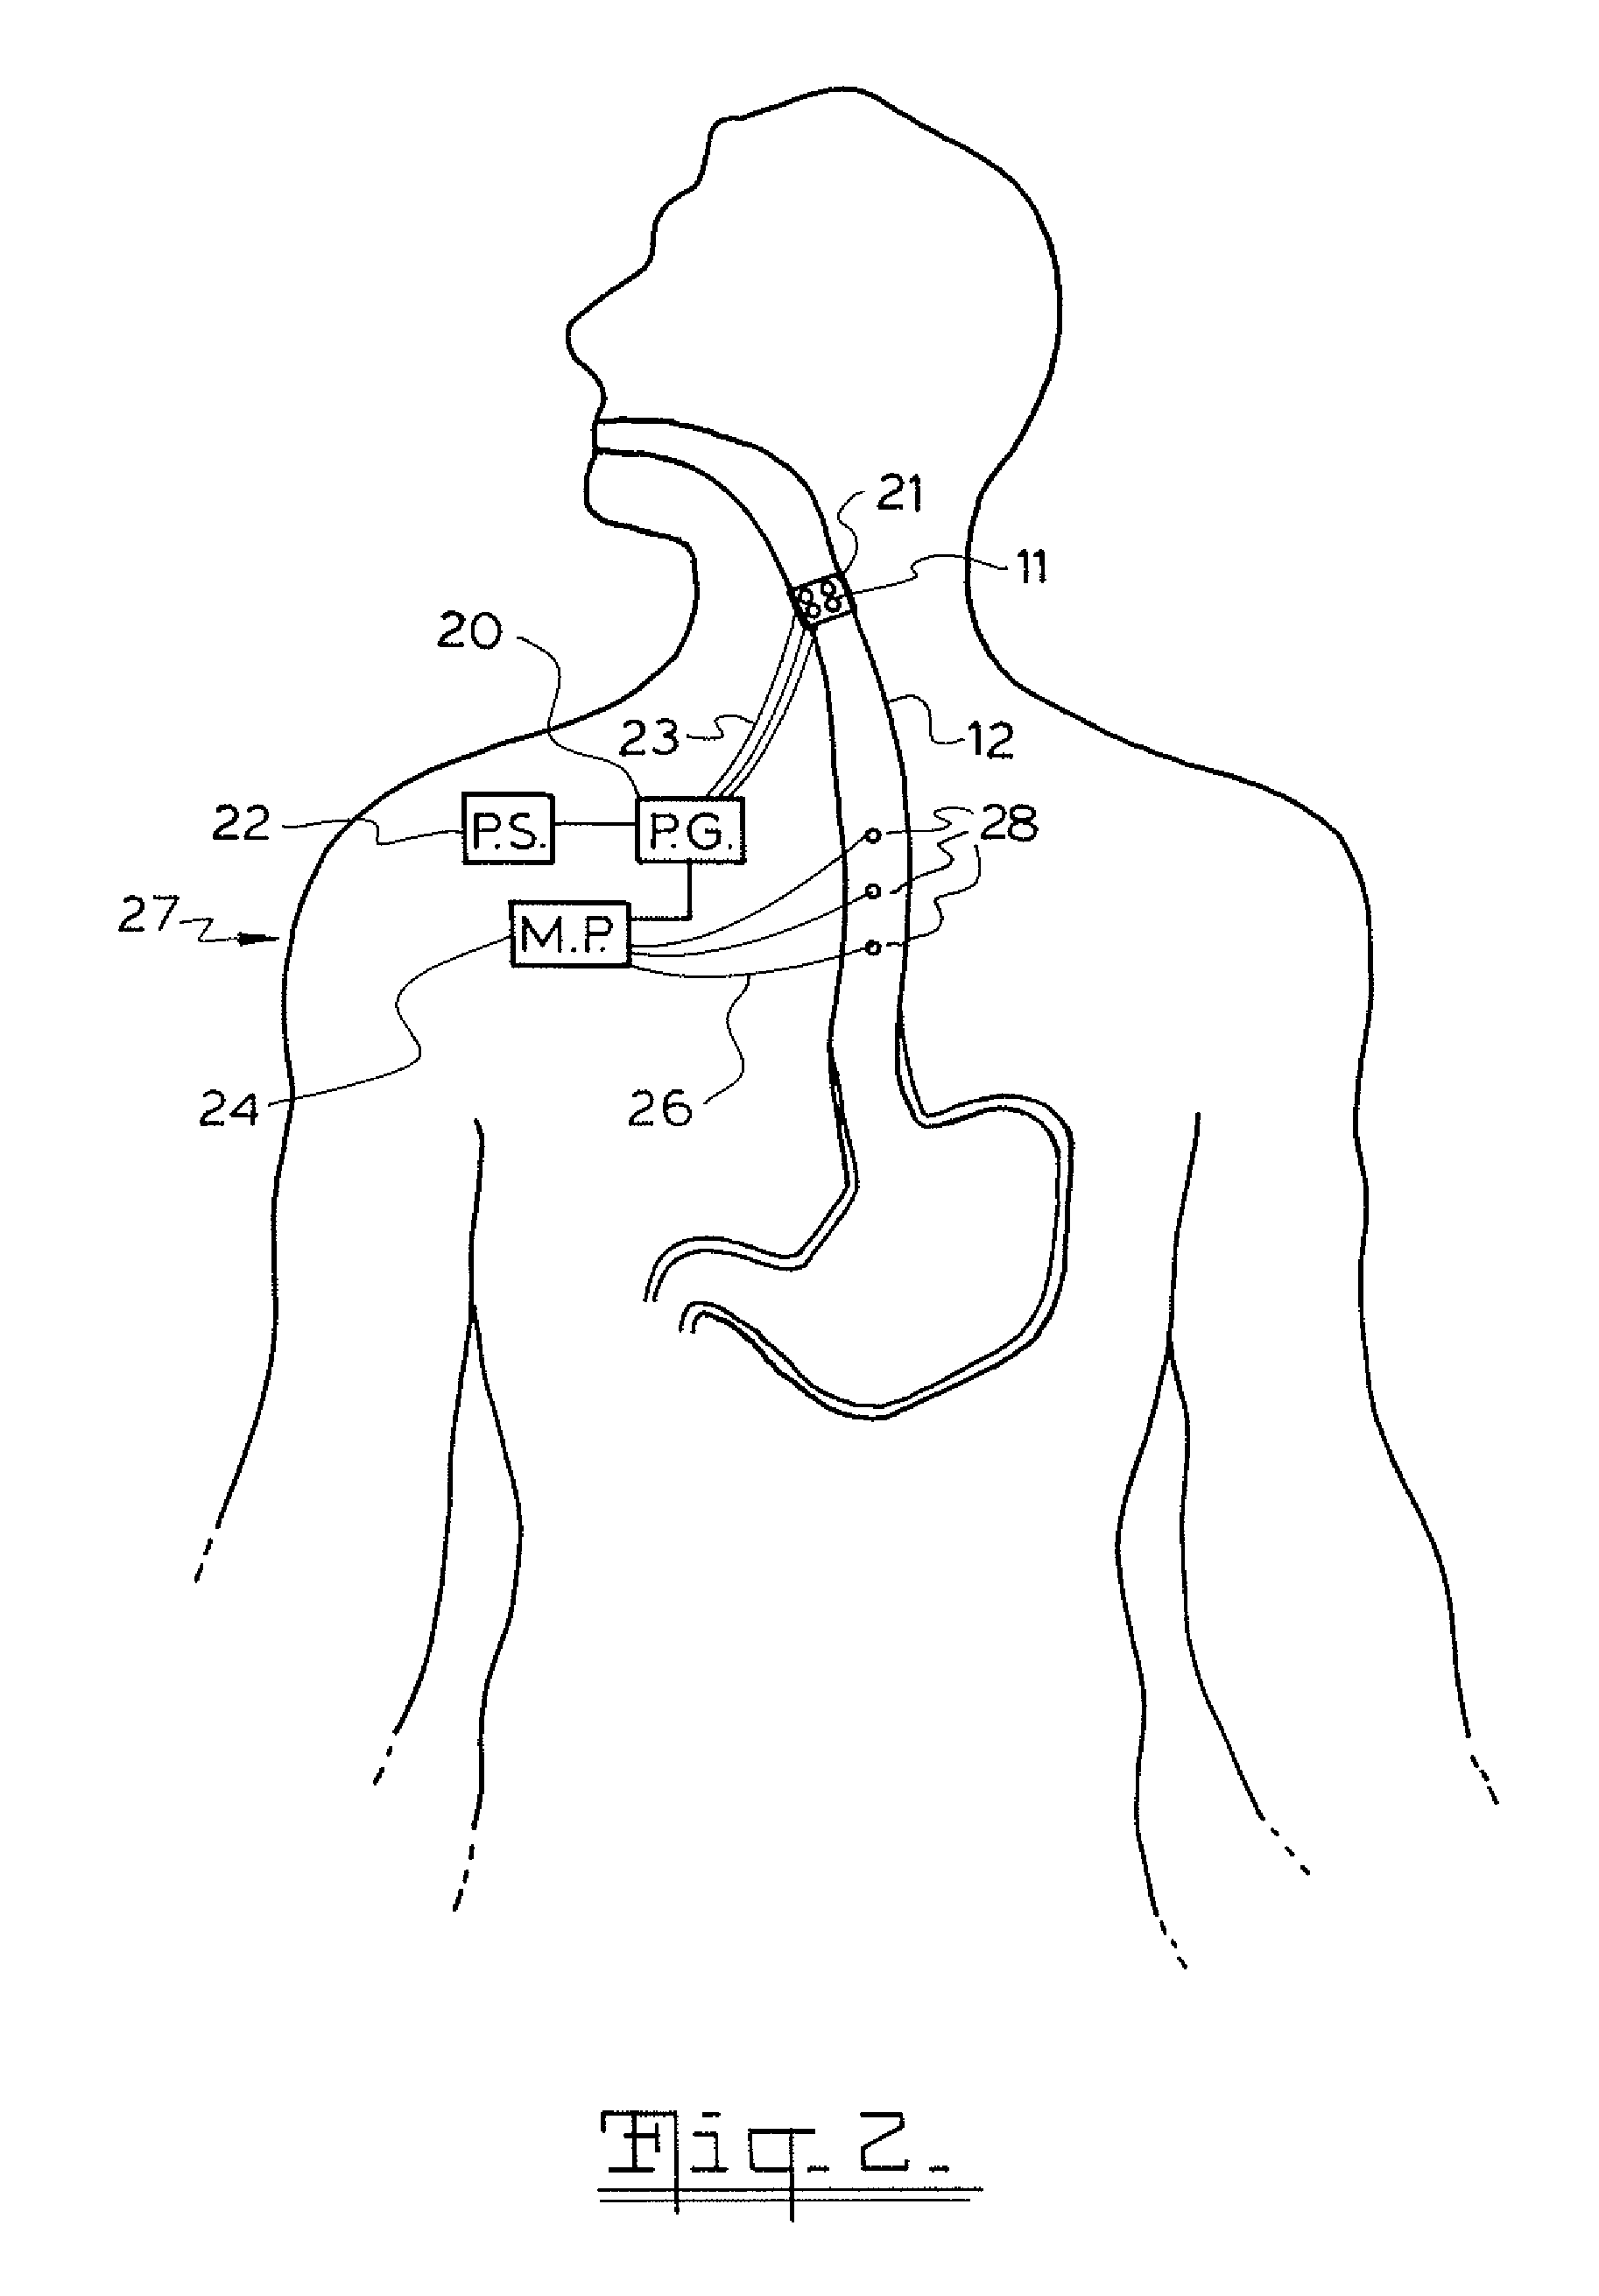 Method and apparatus for treatment of the gastrointestinal tract